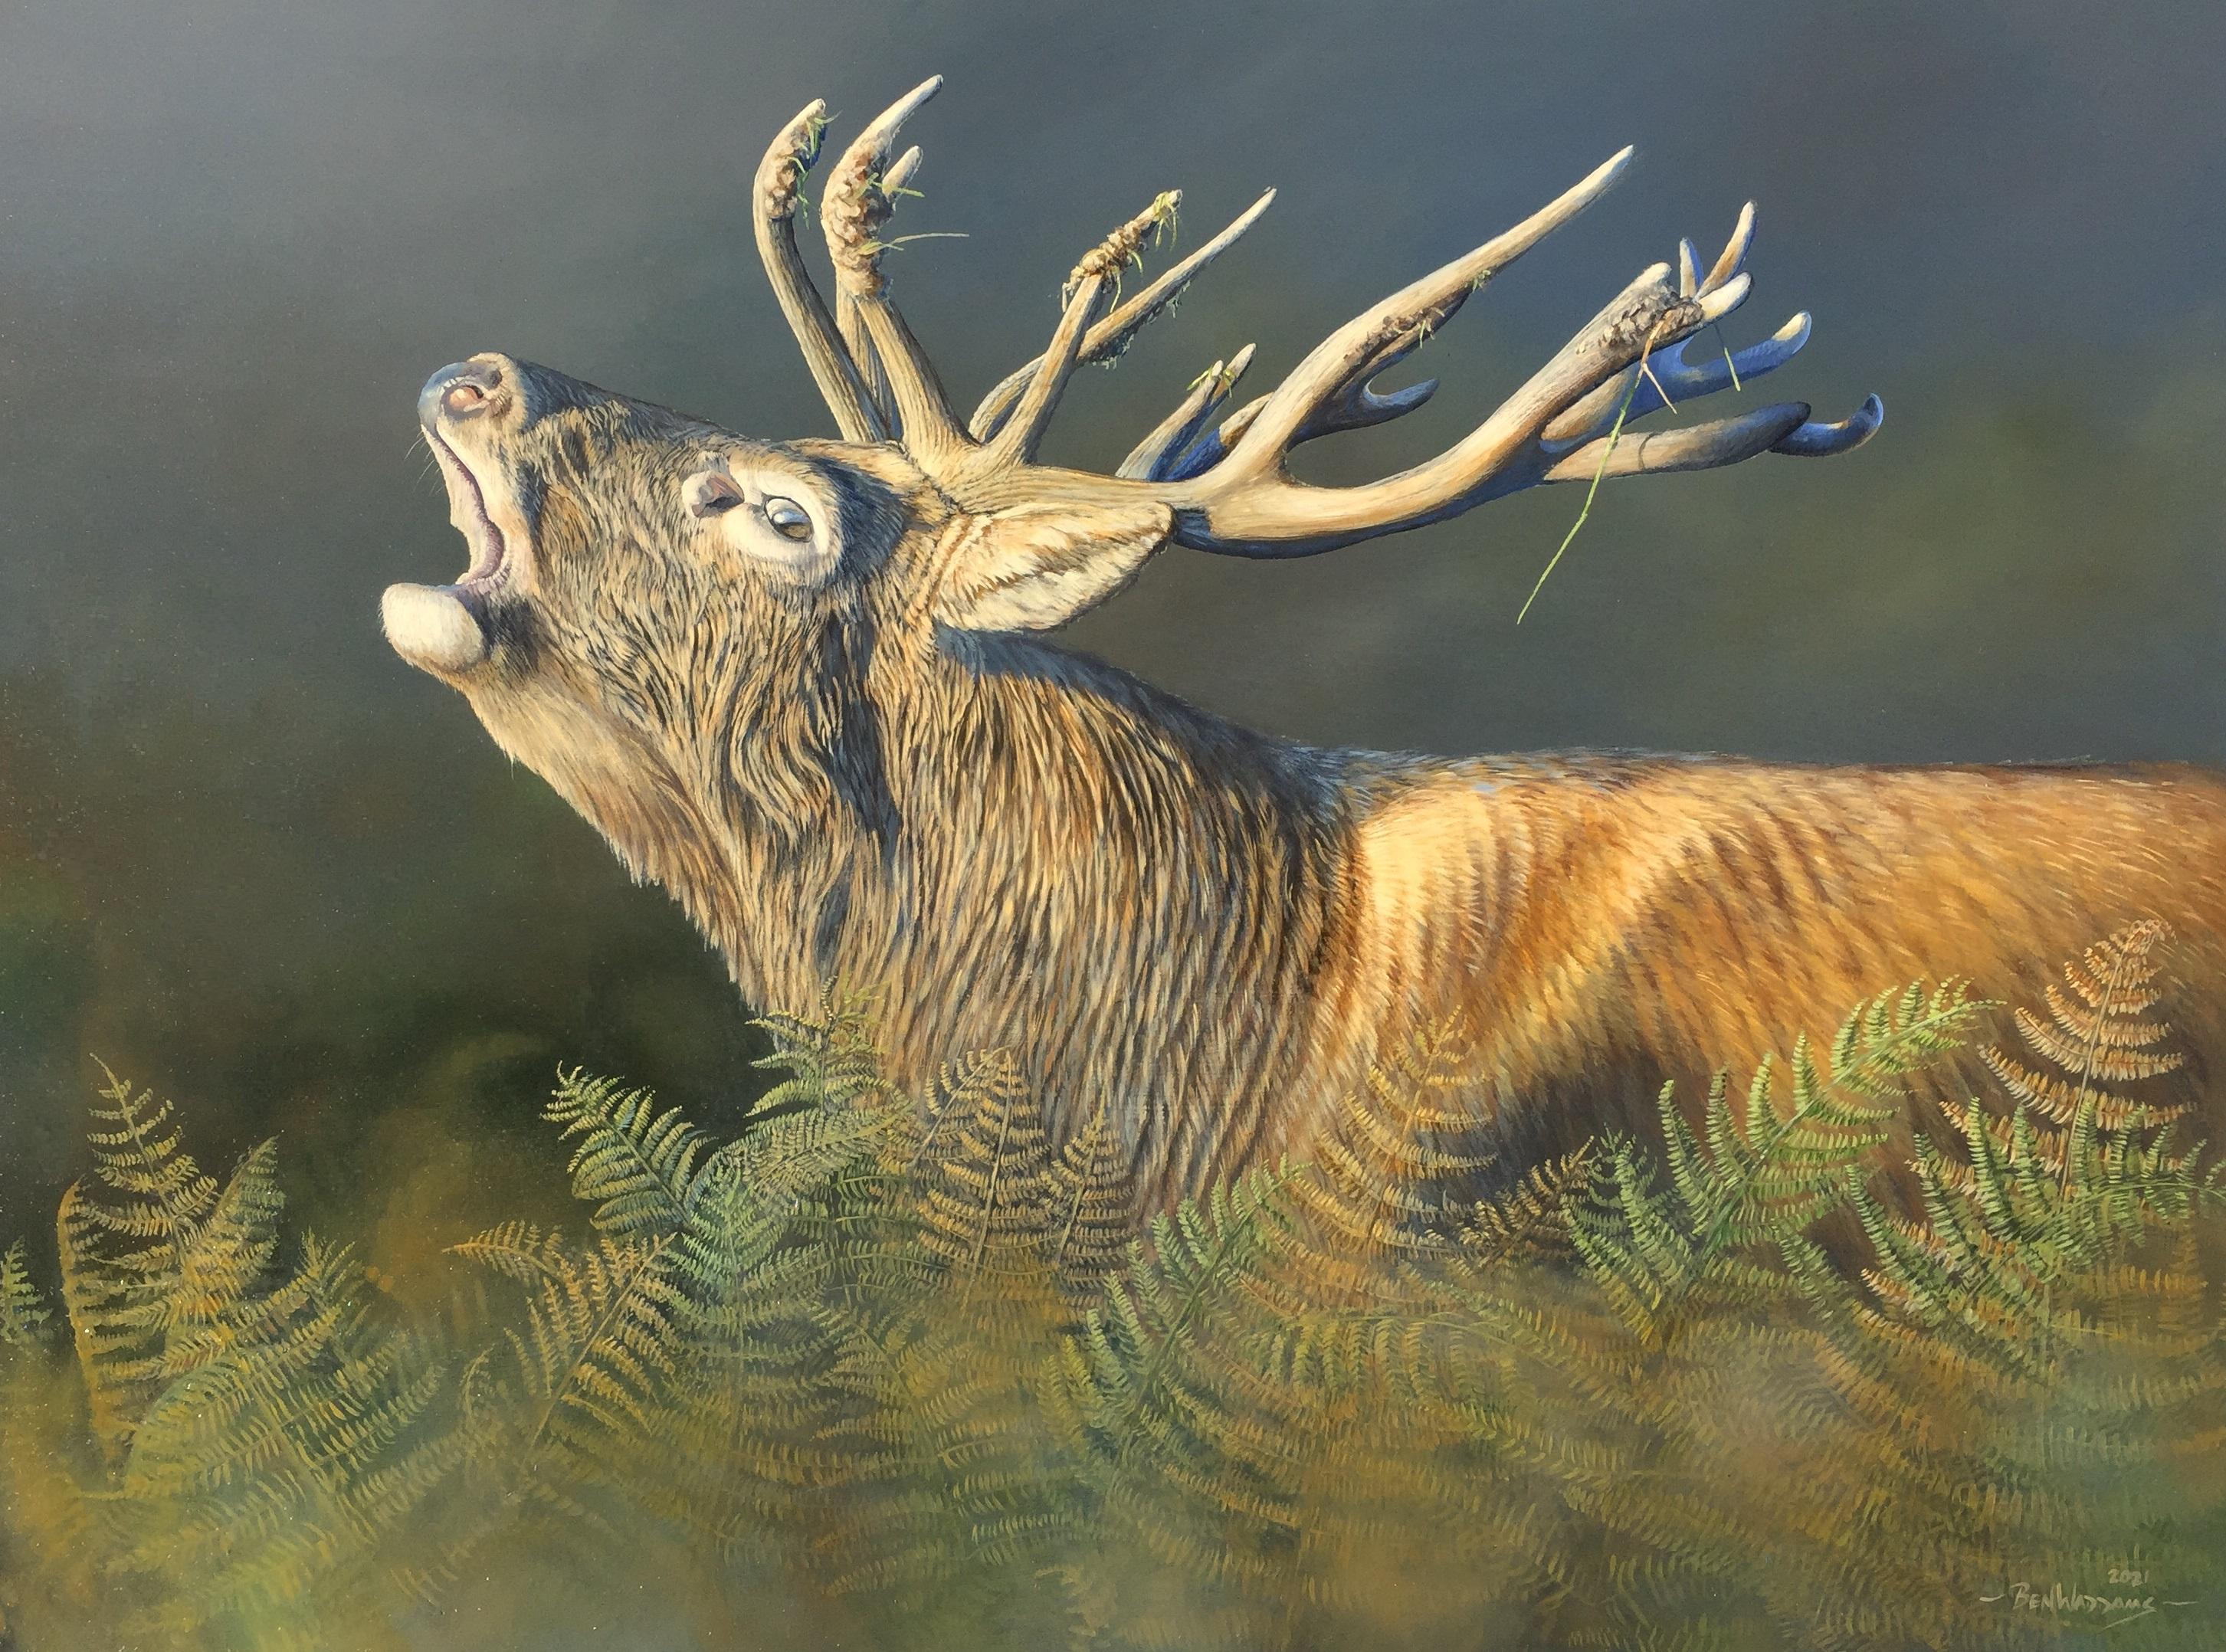 Ben Waddams  Animal Painting - 'Shattering Dawn' Photorealistic Painting of a deer in woodland greenery 